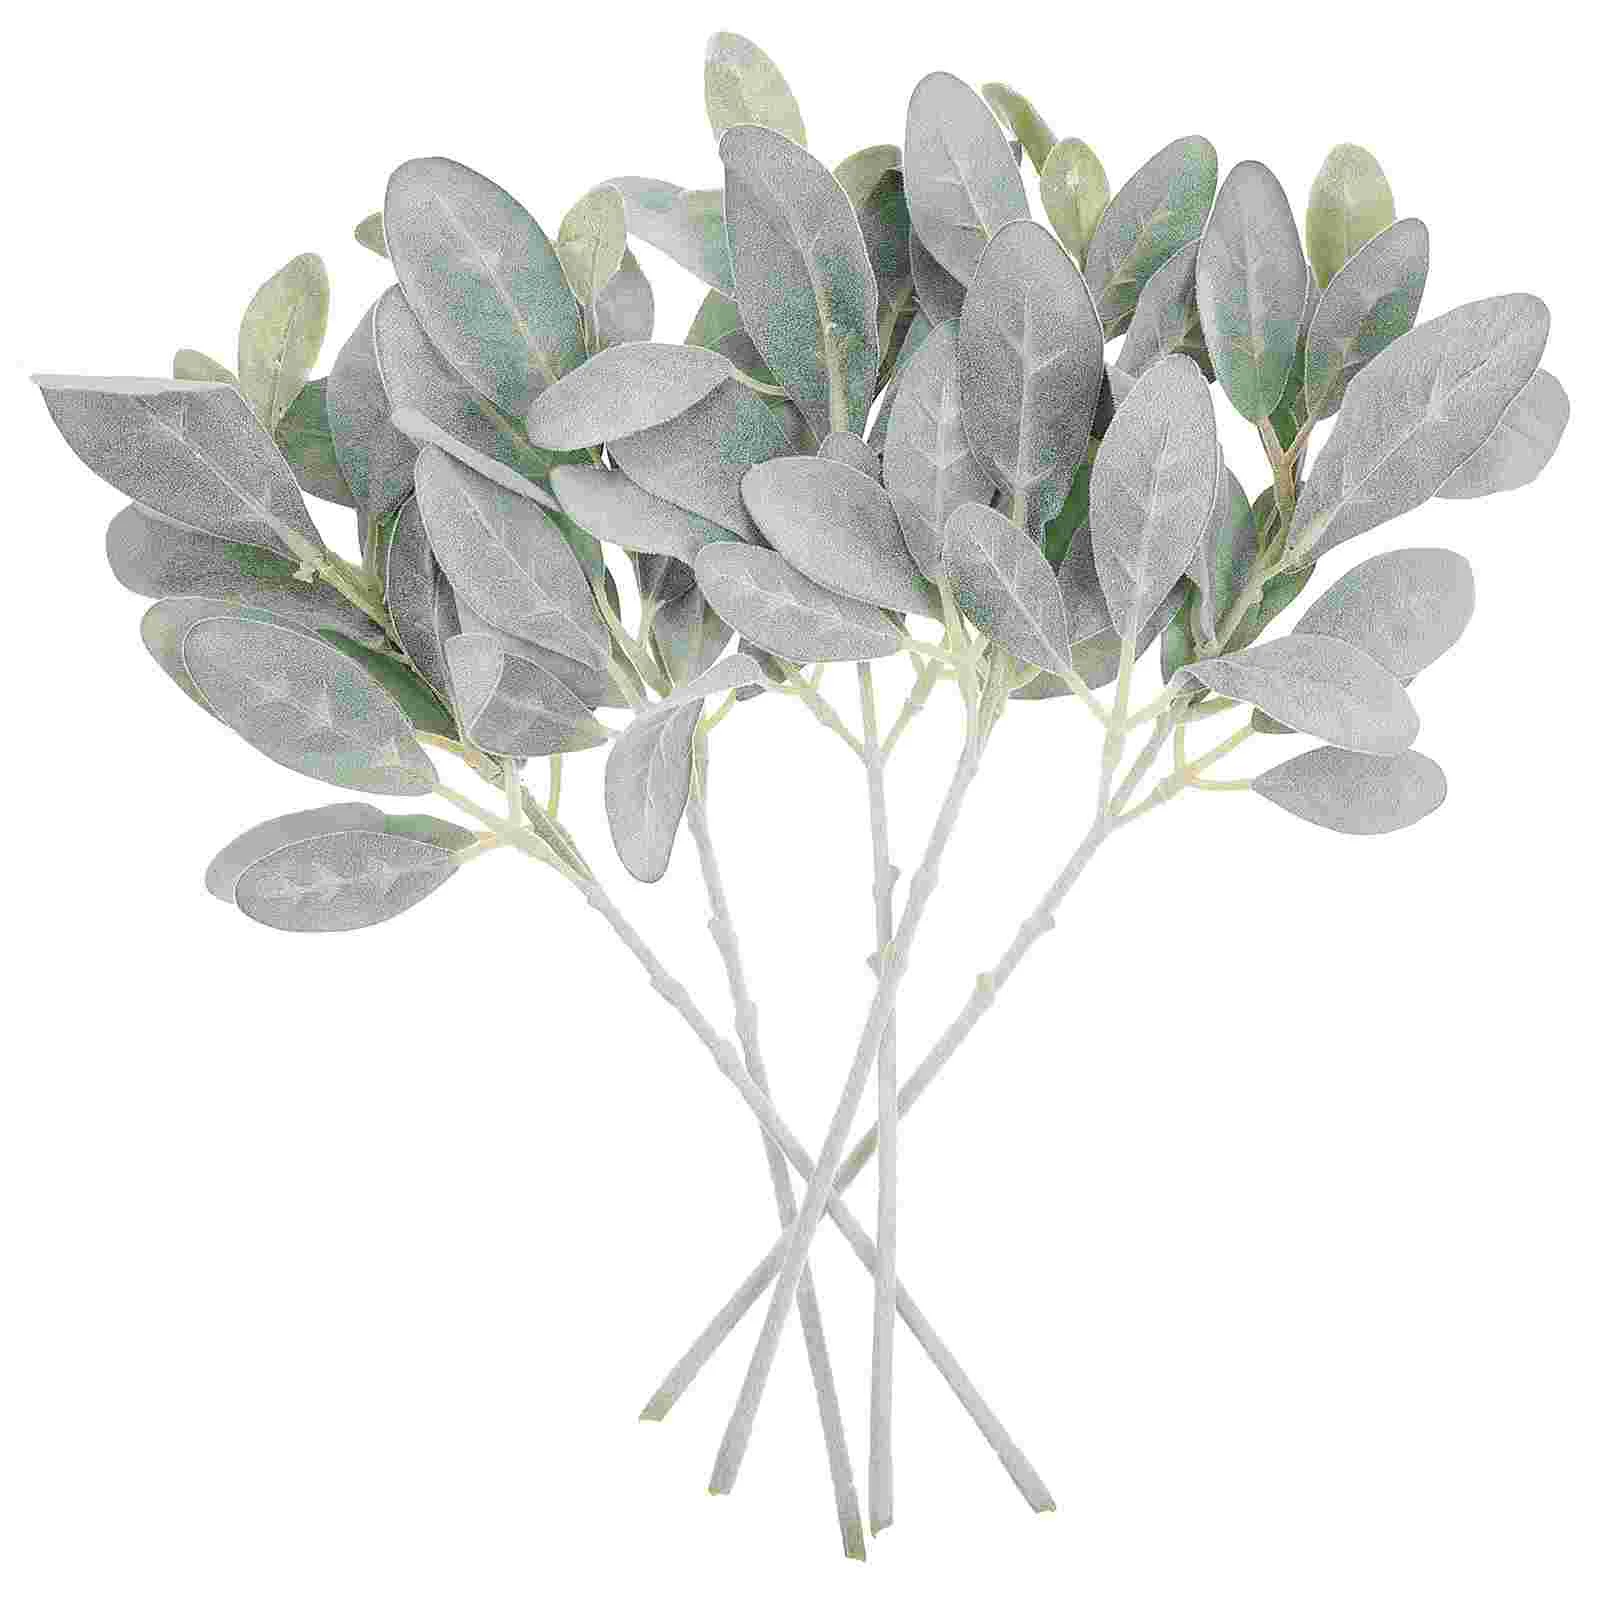 

5pcs Flocking Leaves Flocked Lambs Ear Leaf Artificial Greenery Fake Greenery Leaves Real Touch Leaf